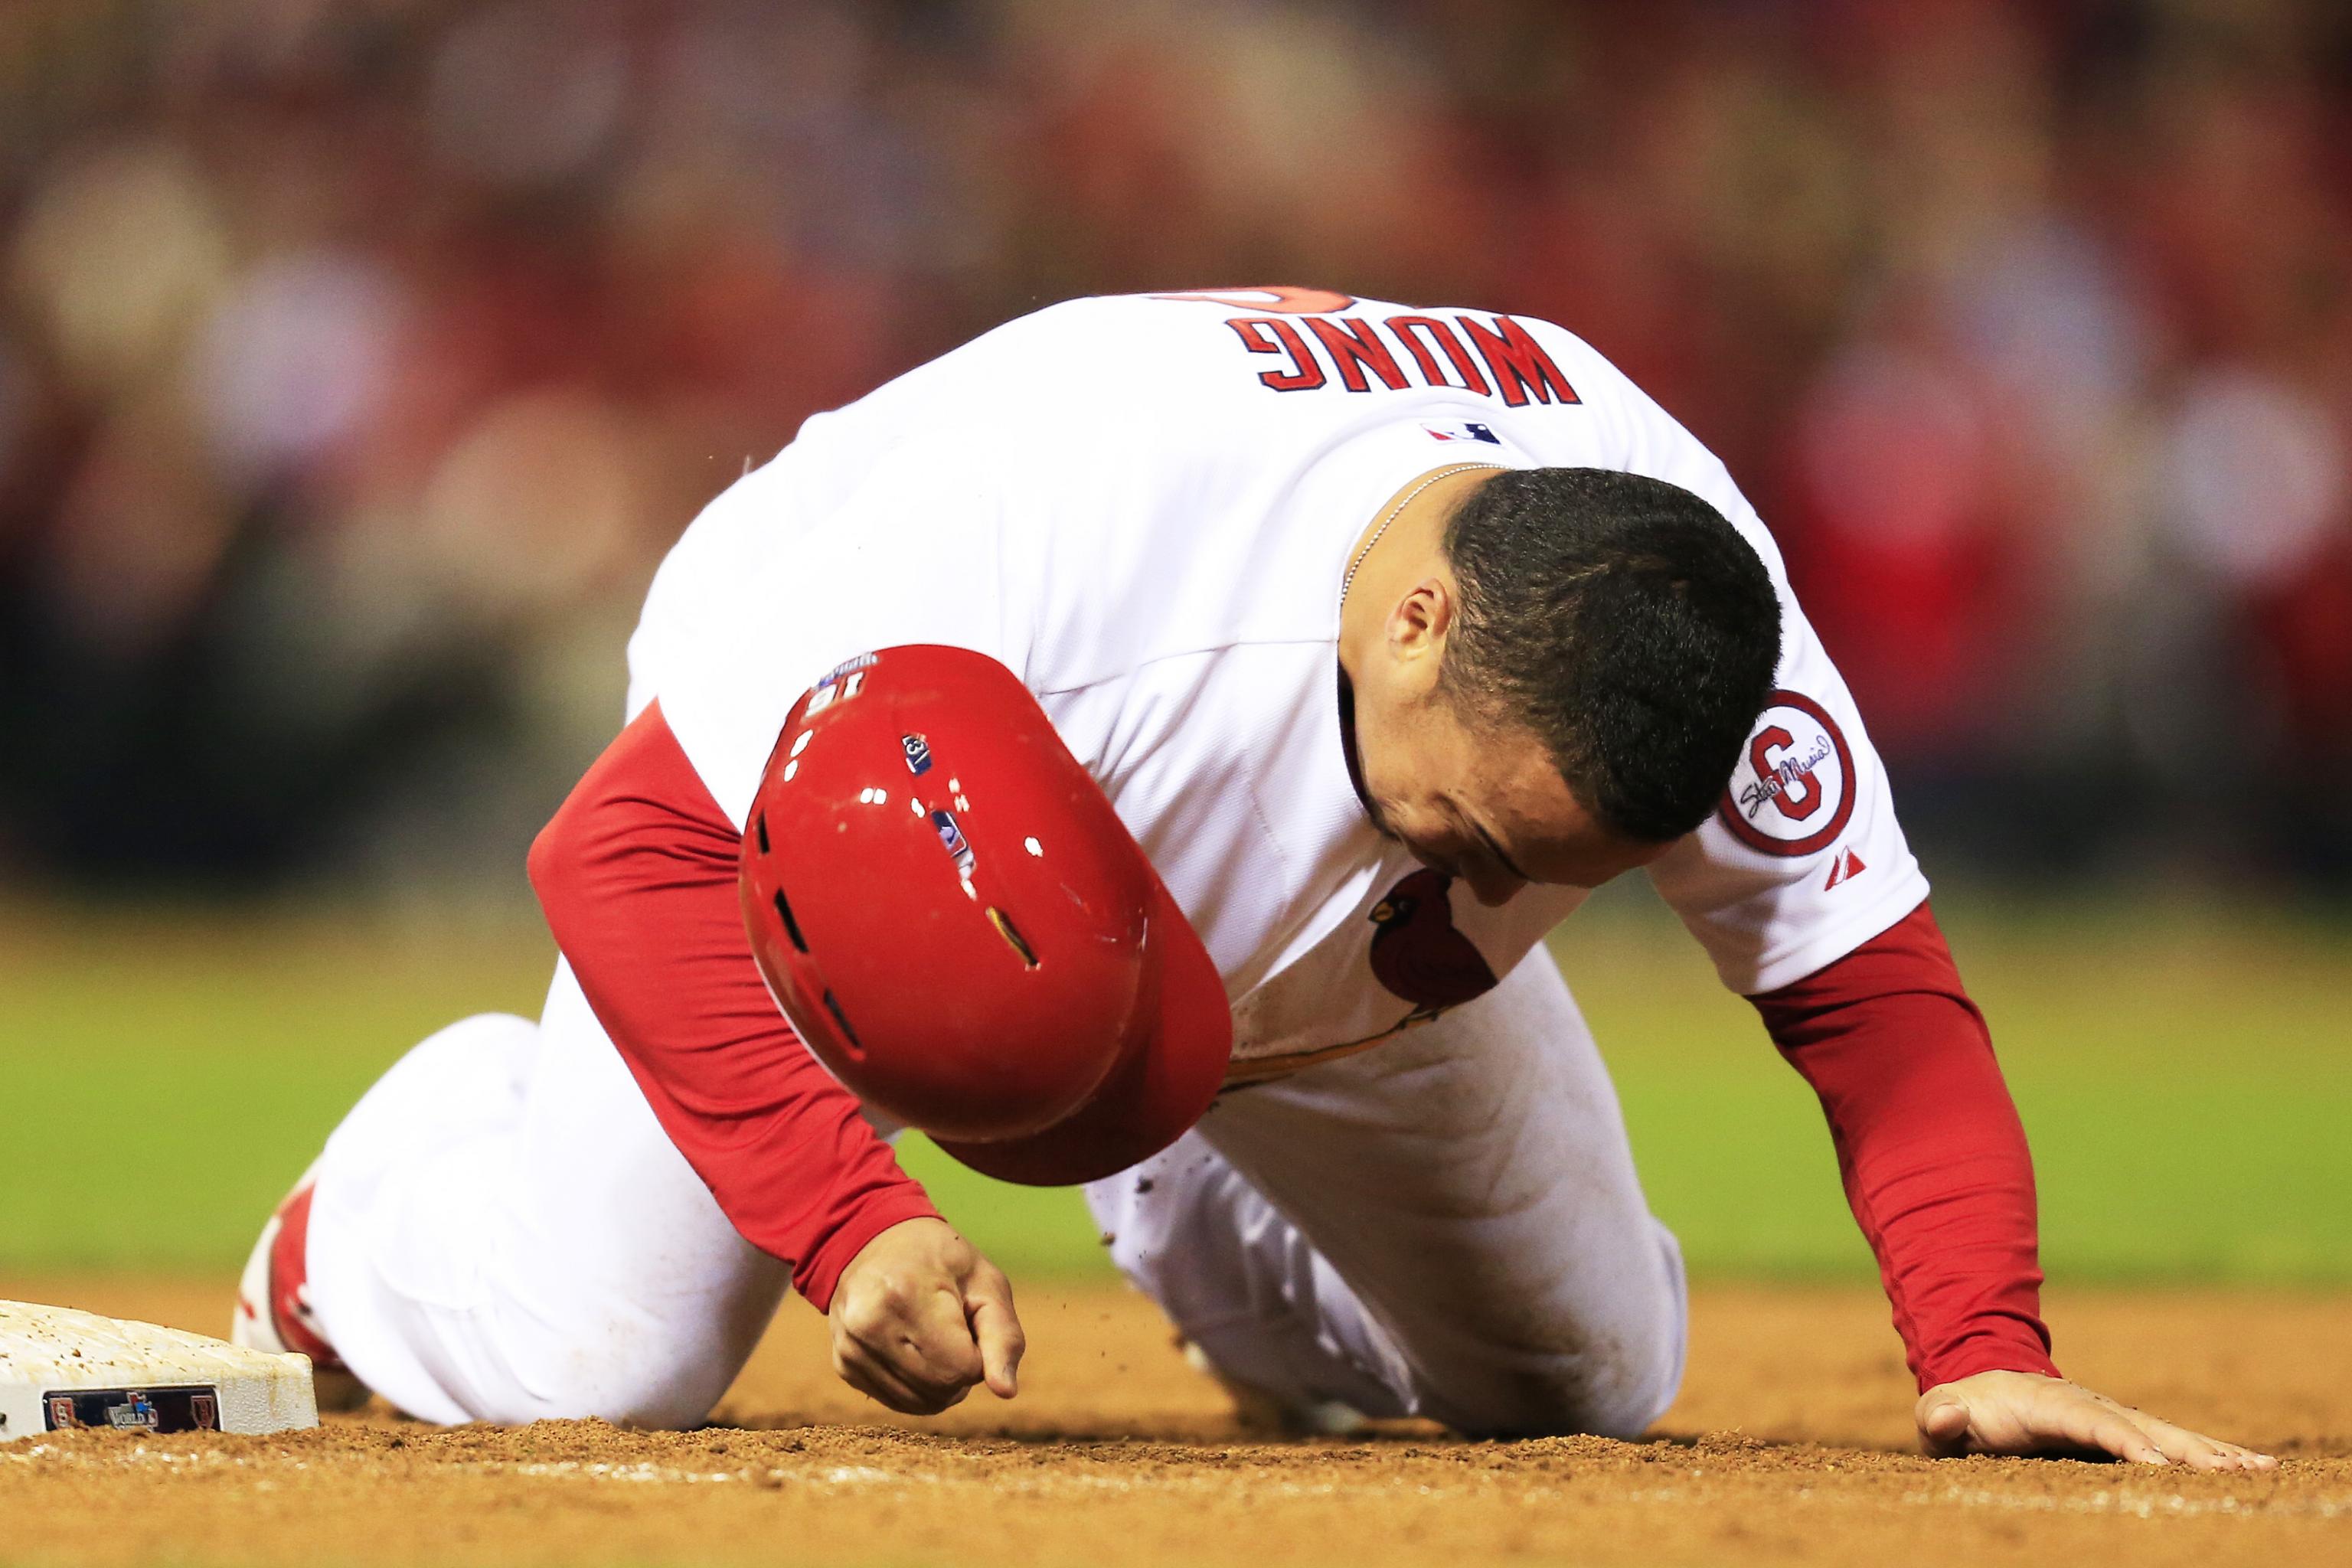 Cardinals Kolten Wong rips Rays for not calling up brother Kean